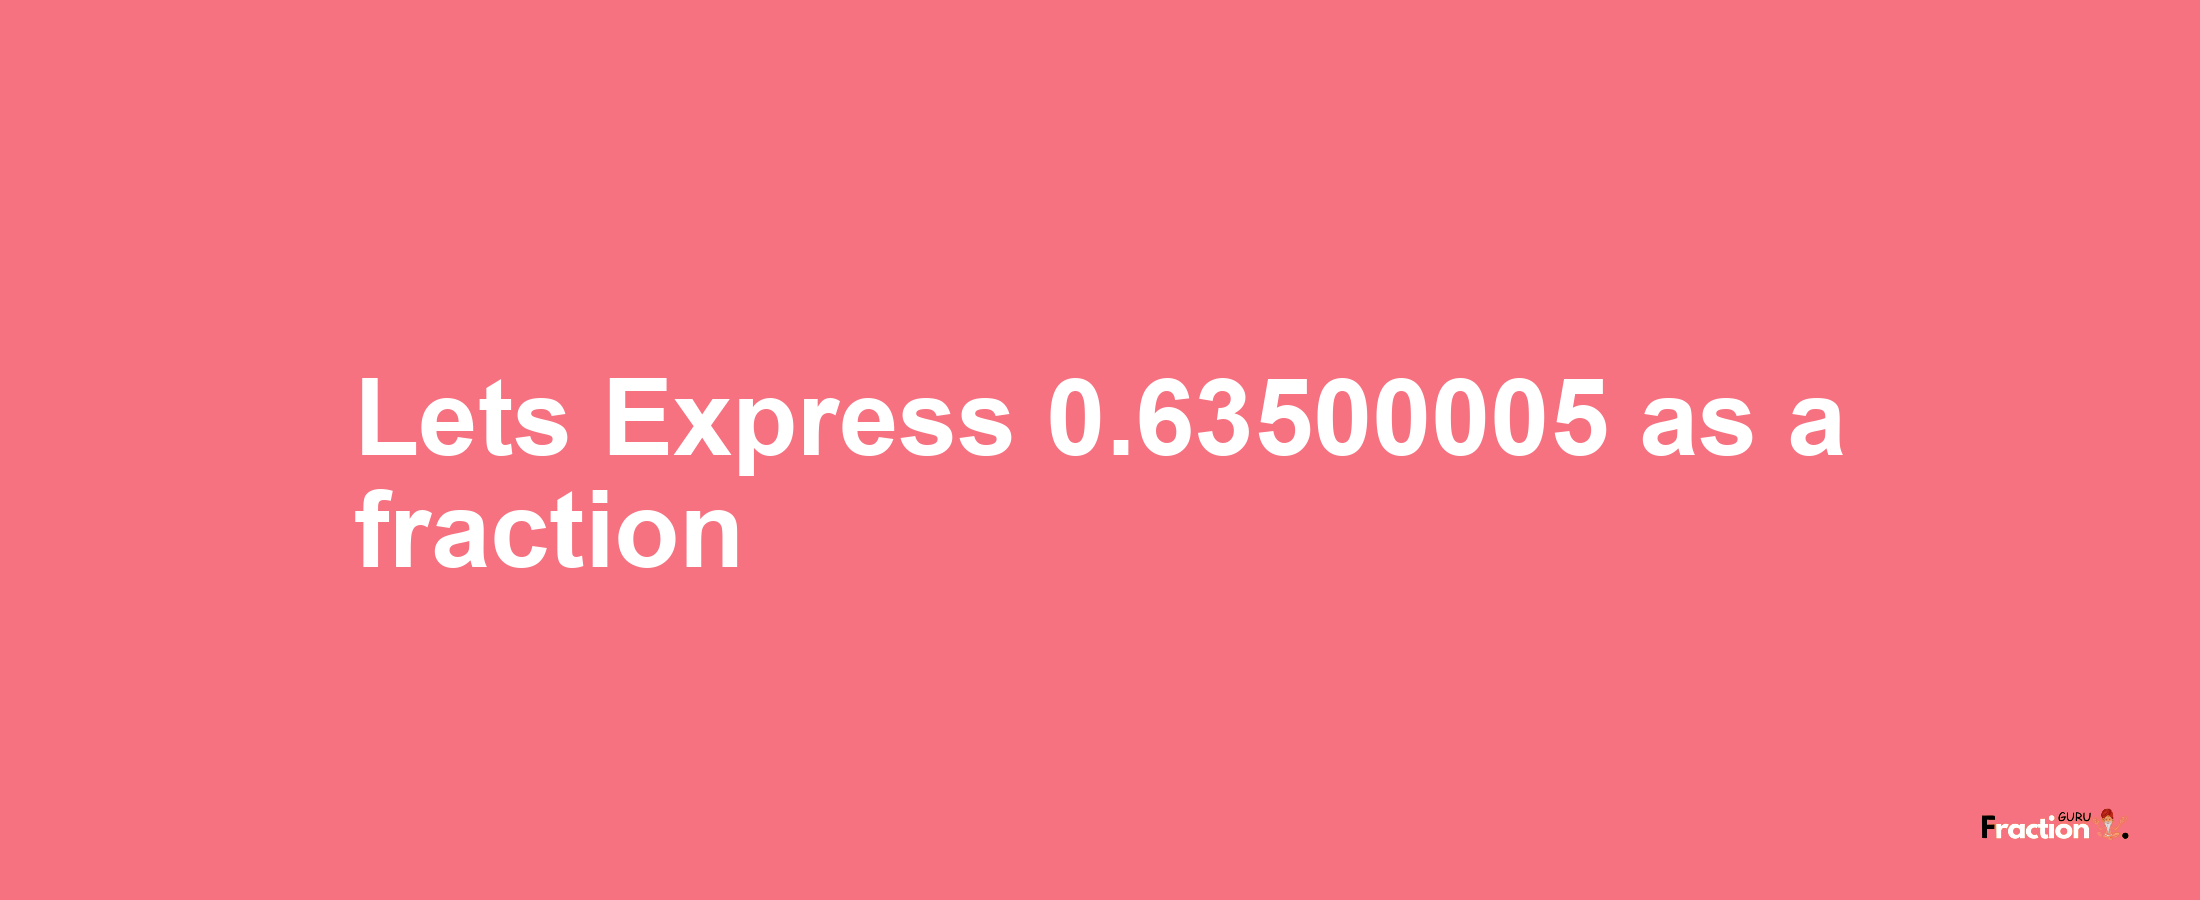 Lets Express 0.63500005 as afraction